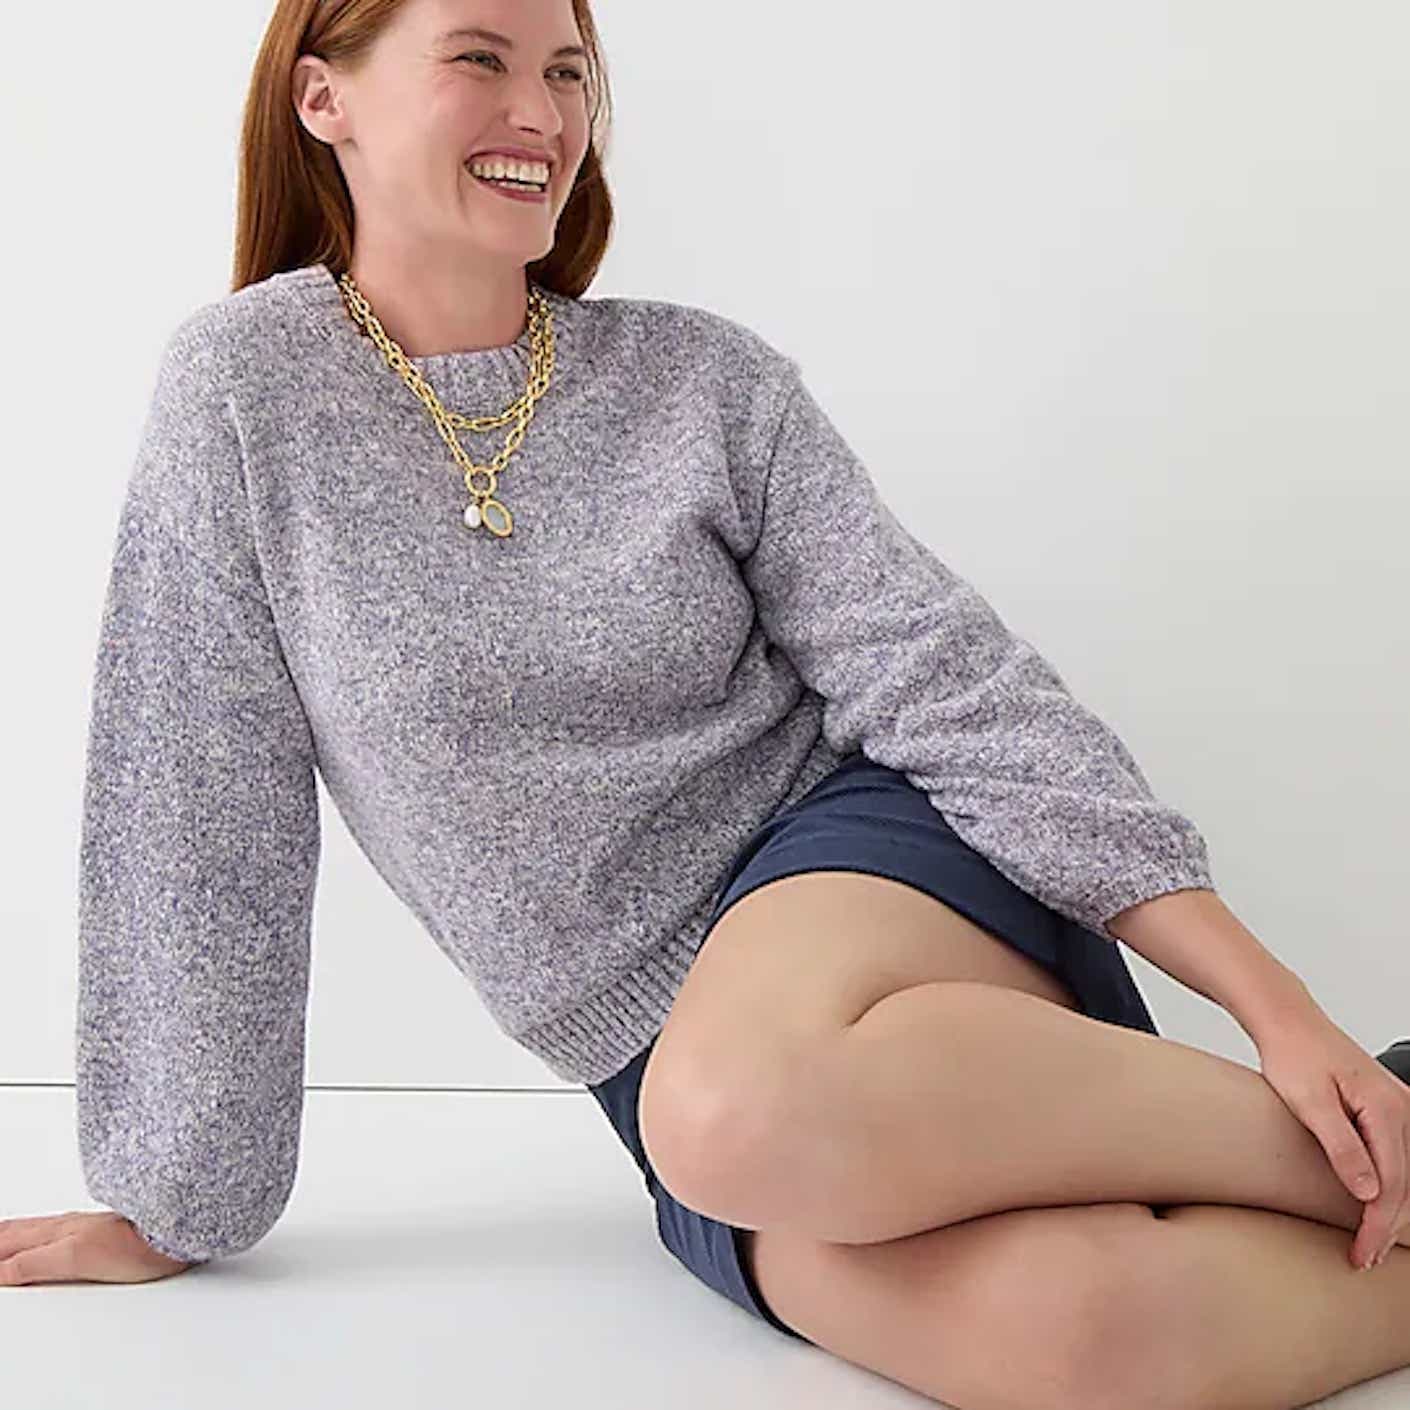 A woman half-sitting up with her knees curled towards the camera wears a light gray, crewneck pullover sweater with slightly puffed long sleeves.